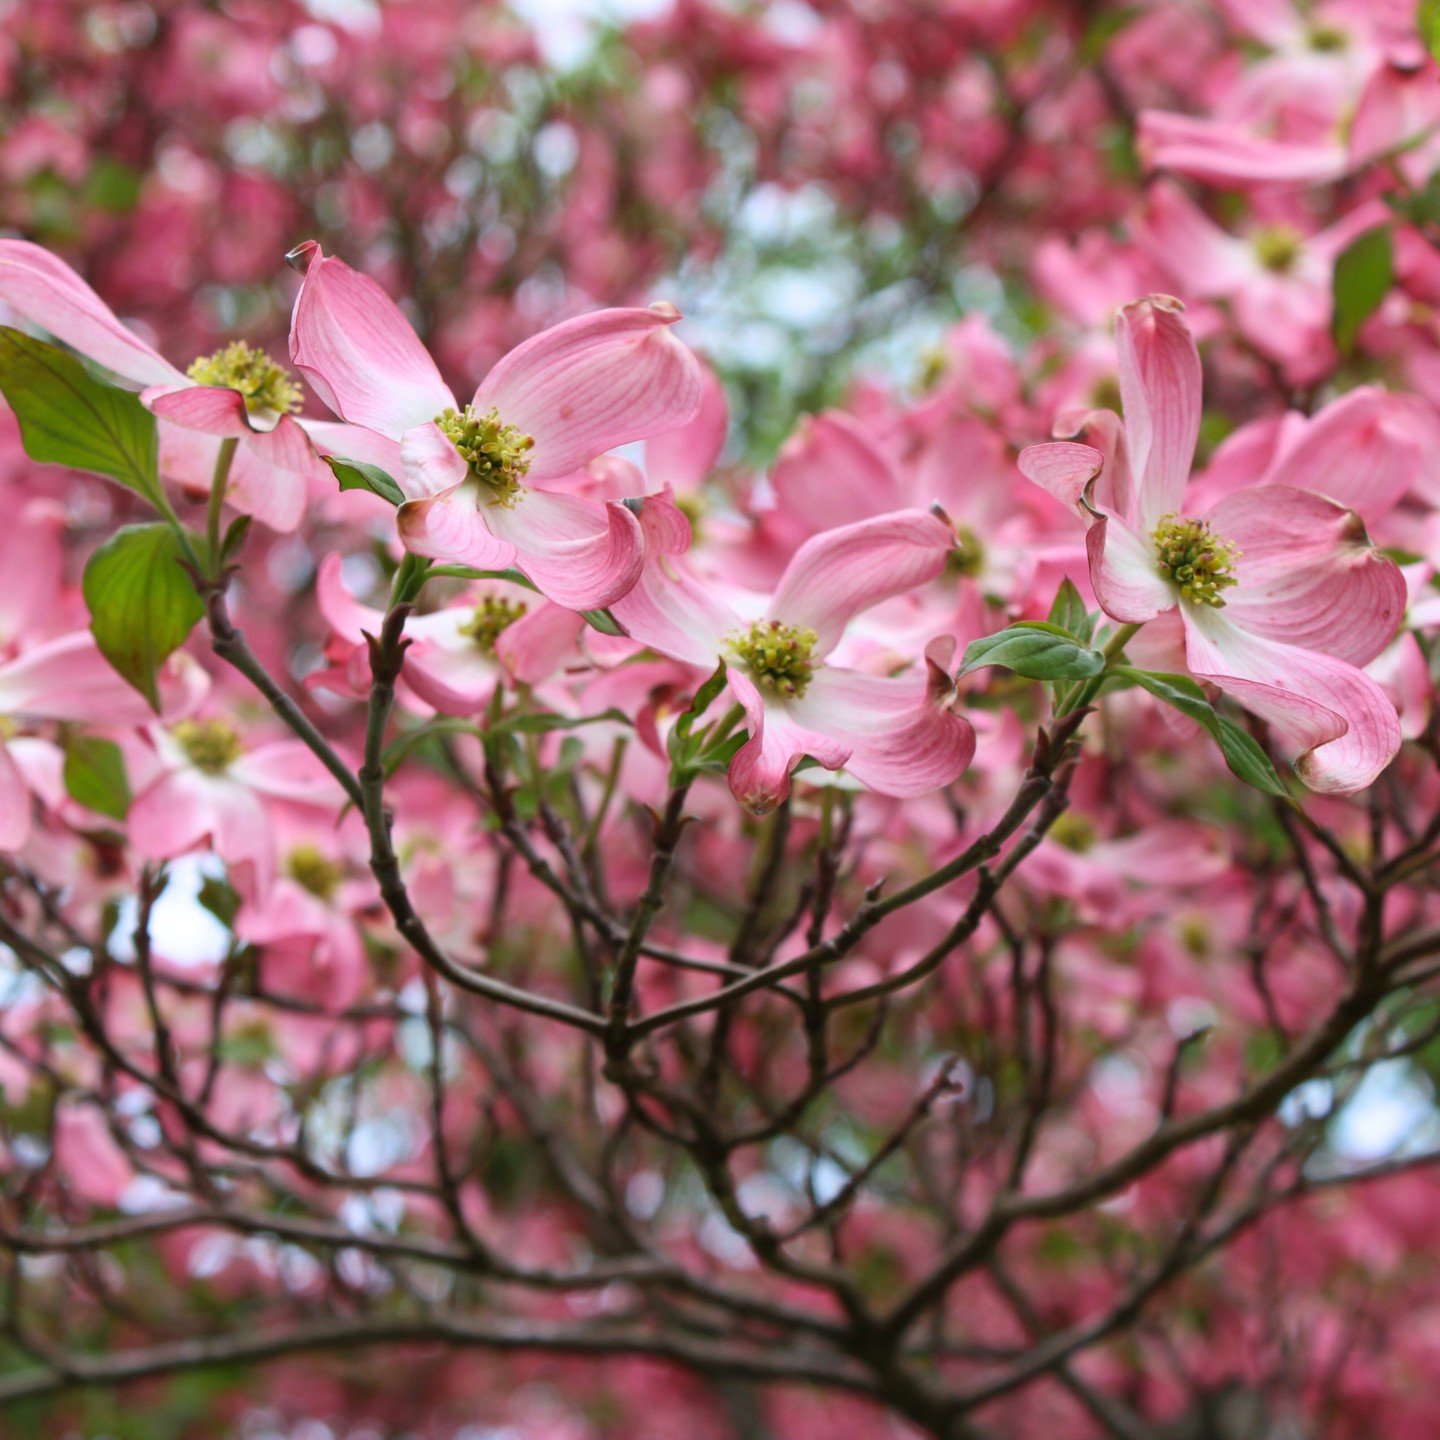 From their stunning flowers in spring to their vibrant foliage in fall, ornamental dogwoods are cherished for their beauty year-round. Whether you're a fan of pink or white blooms, or even variegated leaves, we have plenty of varieties to choose from